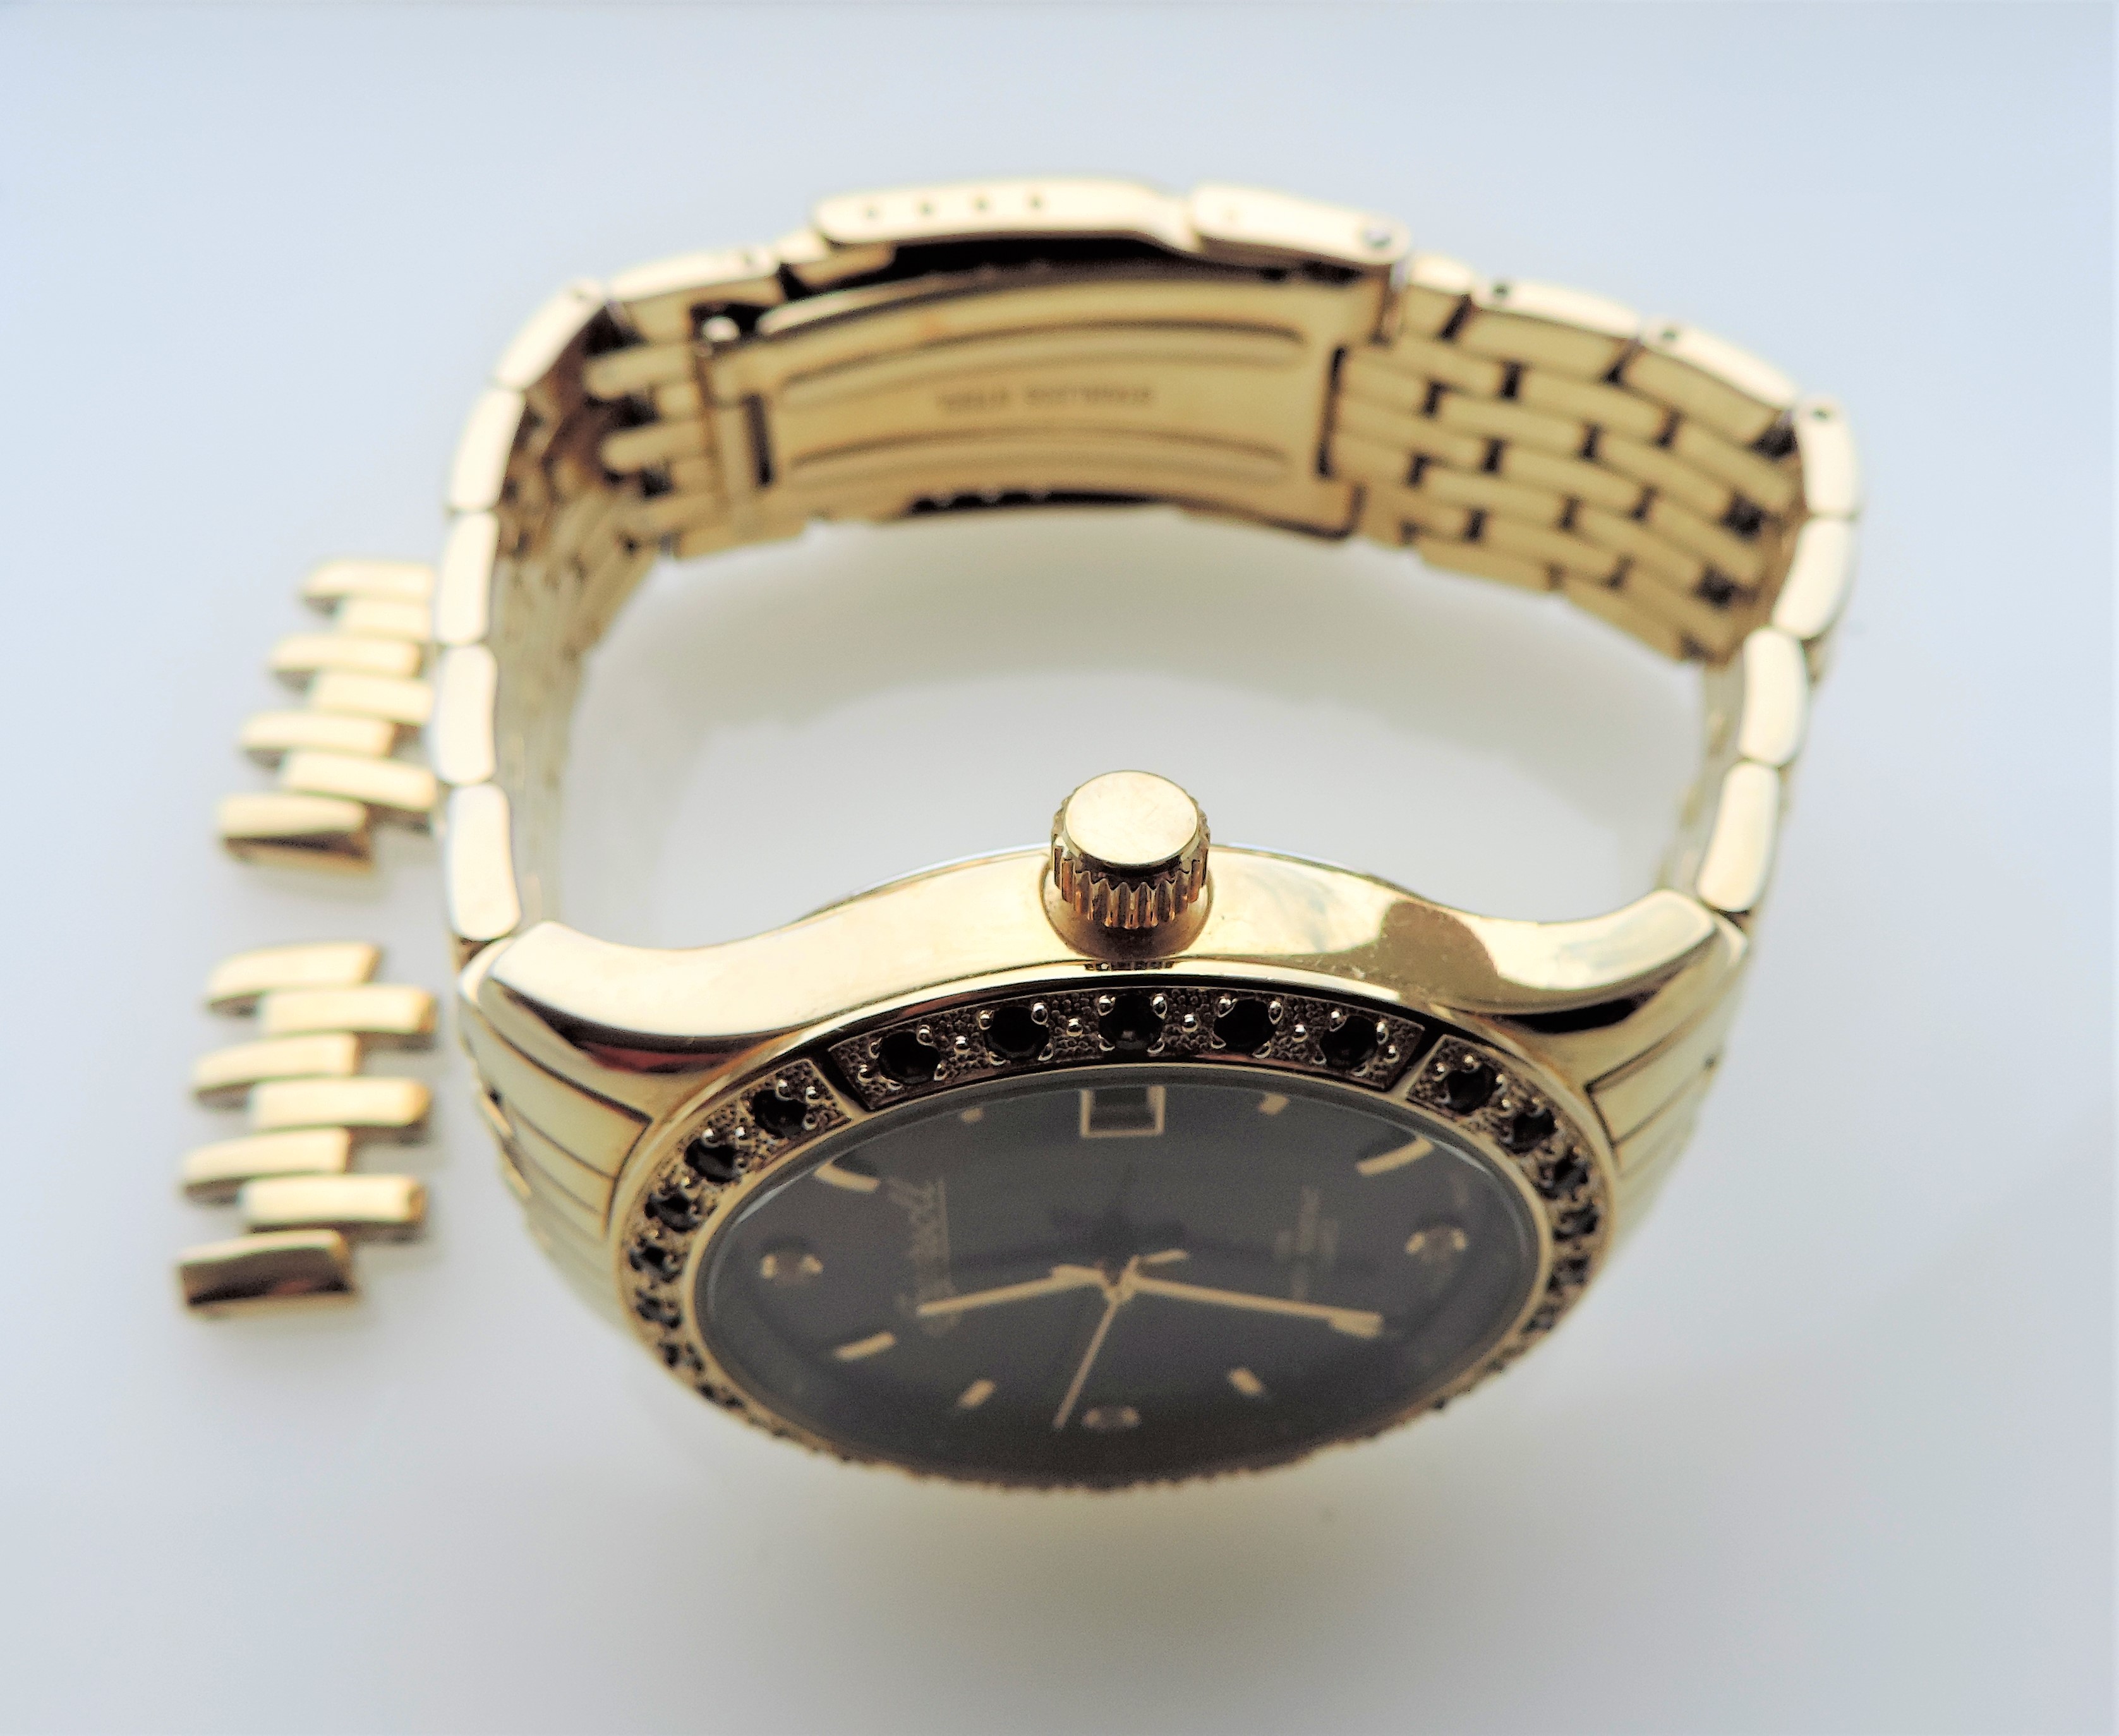 Gents Ingersoll Gems Gold Plated Watch - Image 6 of 10